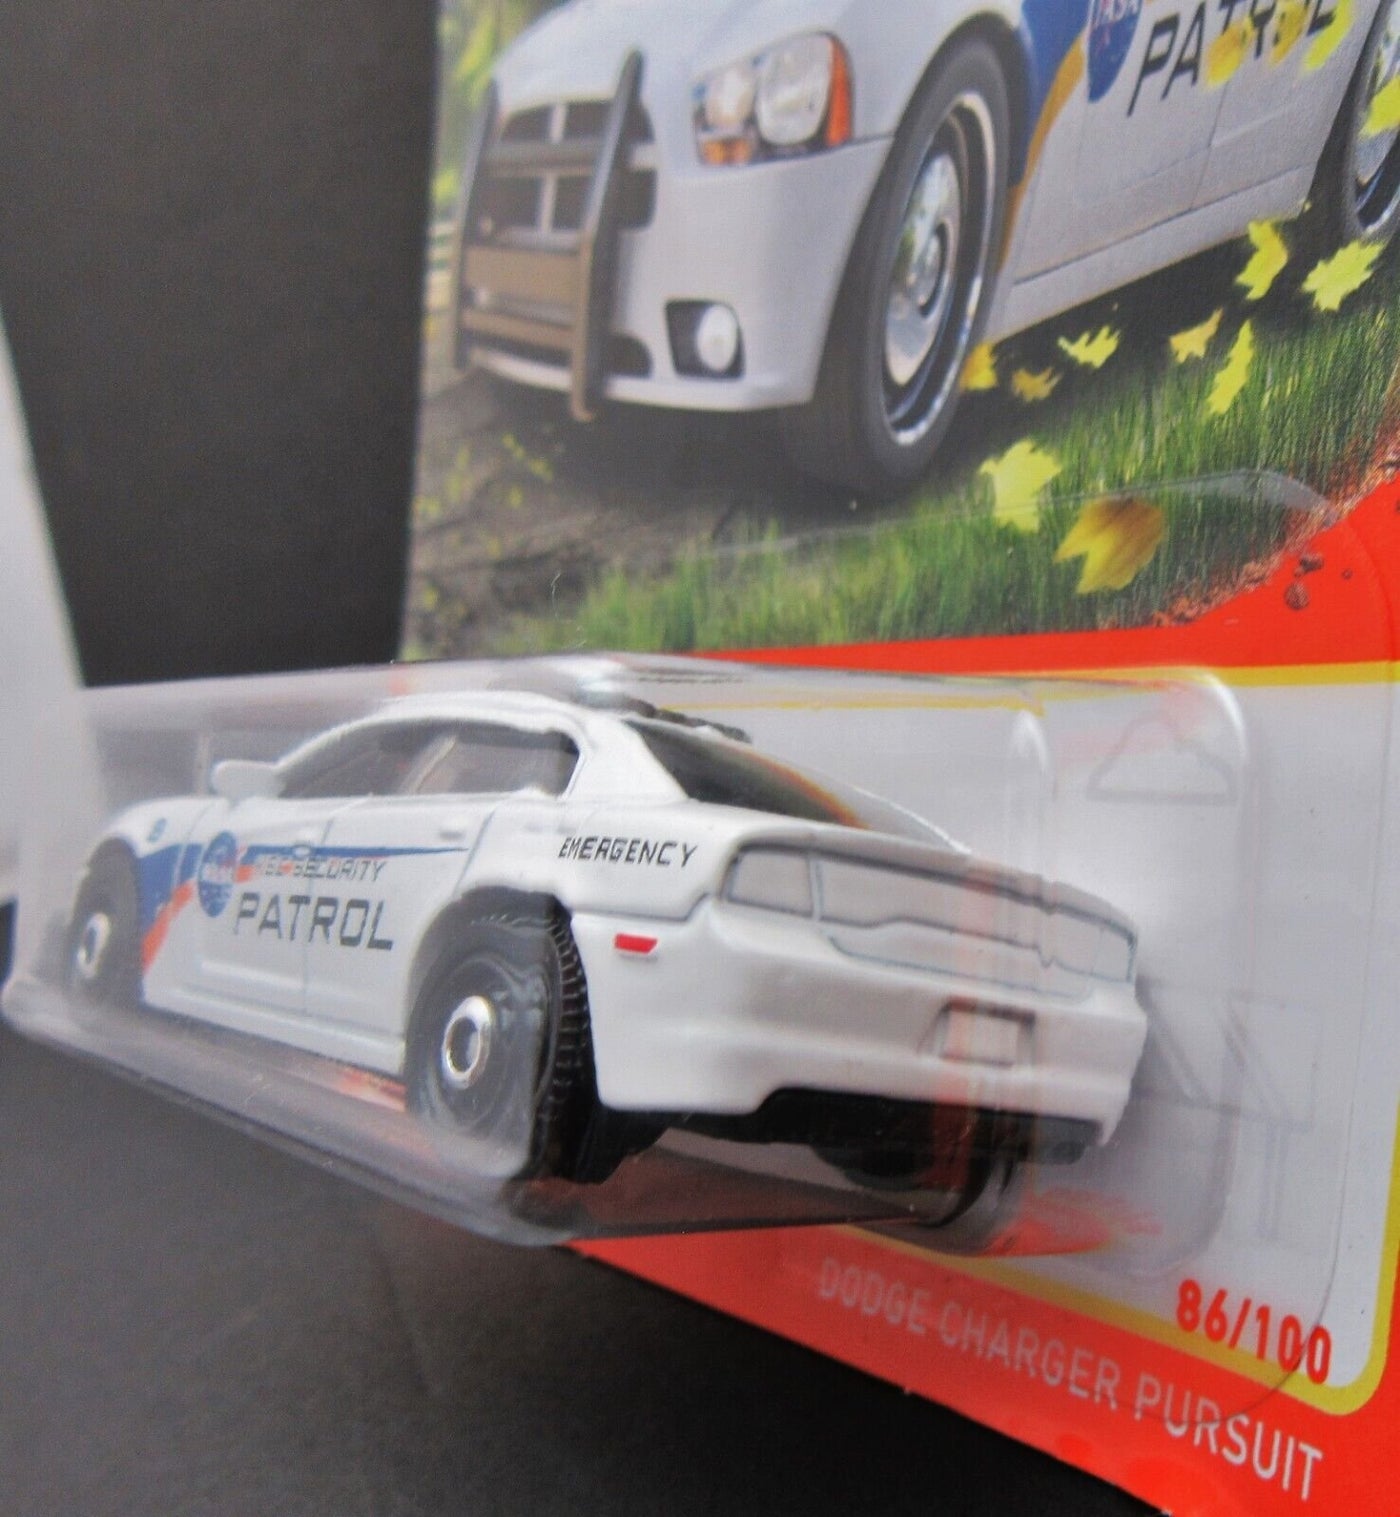 Nasa ~ KSC Security Patrol ~ White Dodge Charger  ~ 1:64 Scale ~ Matchbox